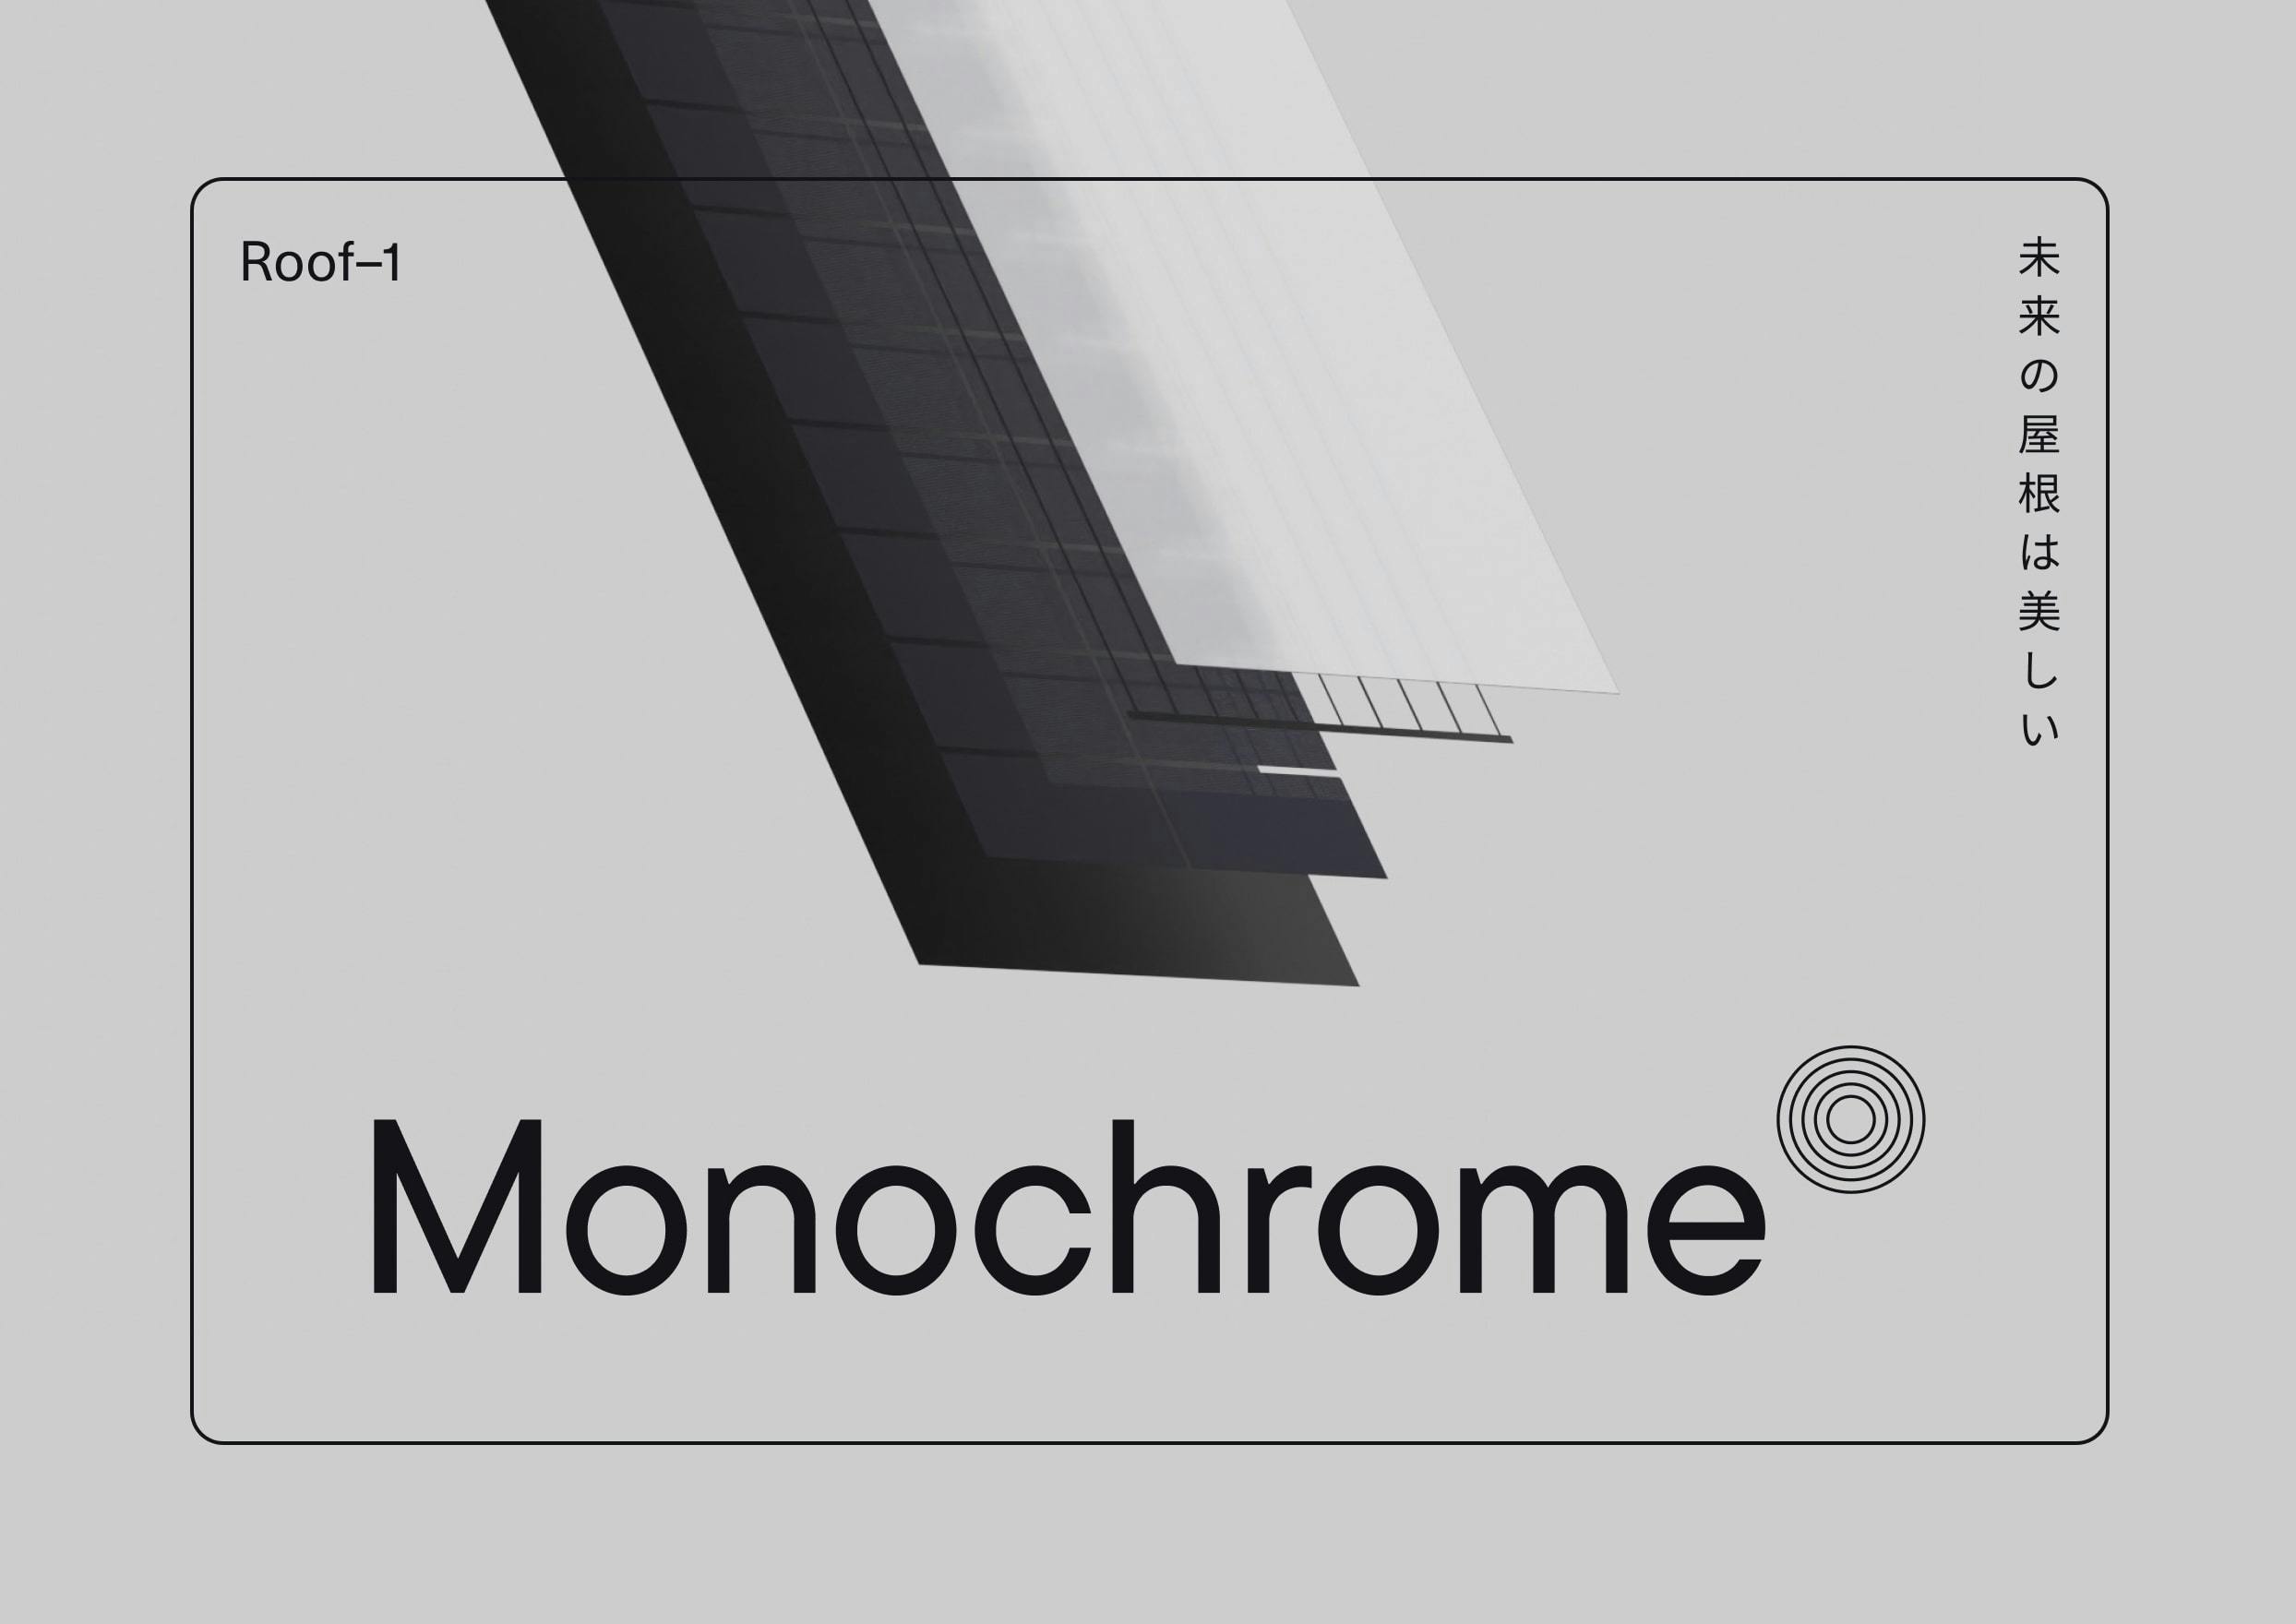 Monochrome at PV Expo